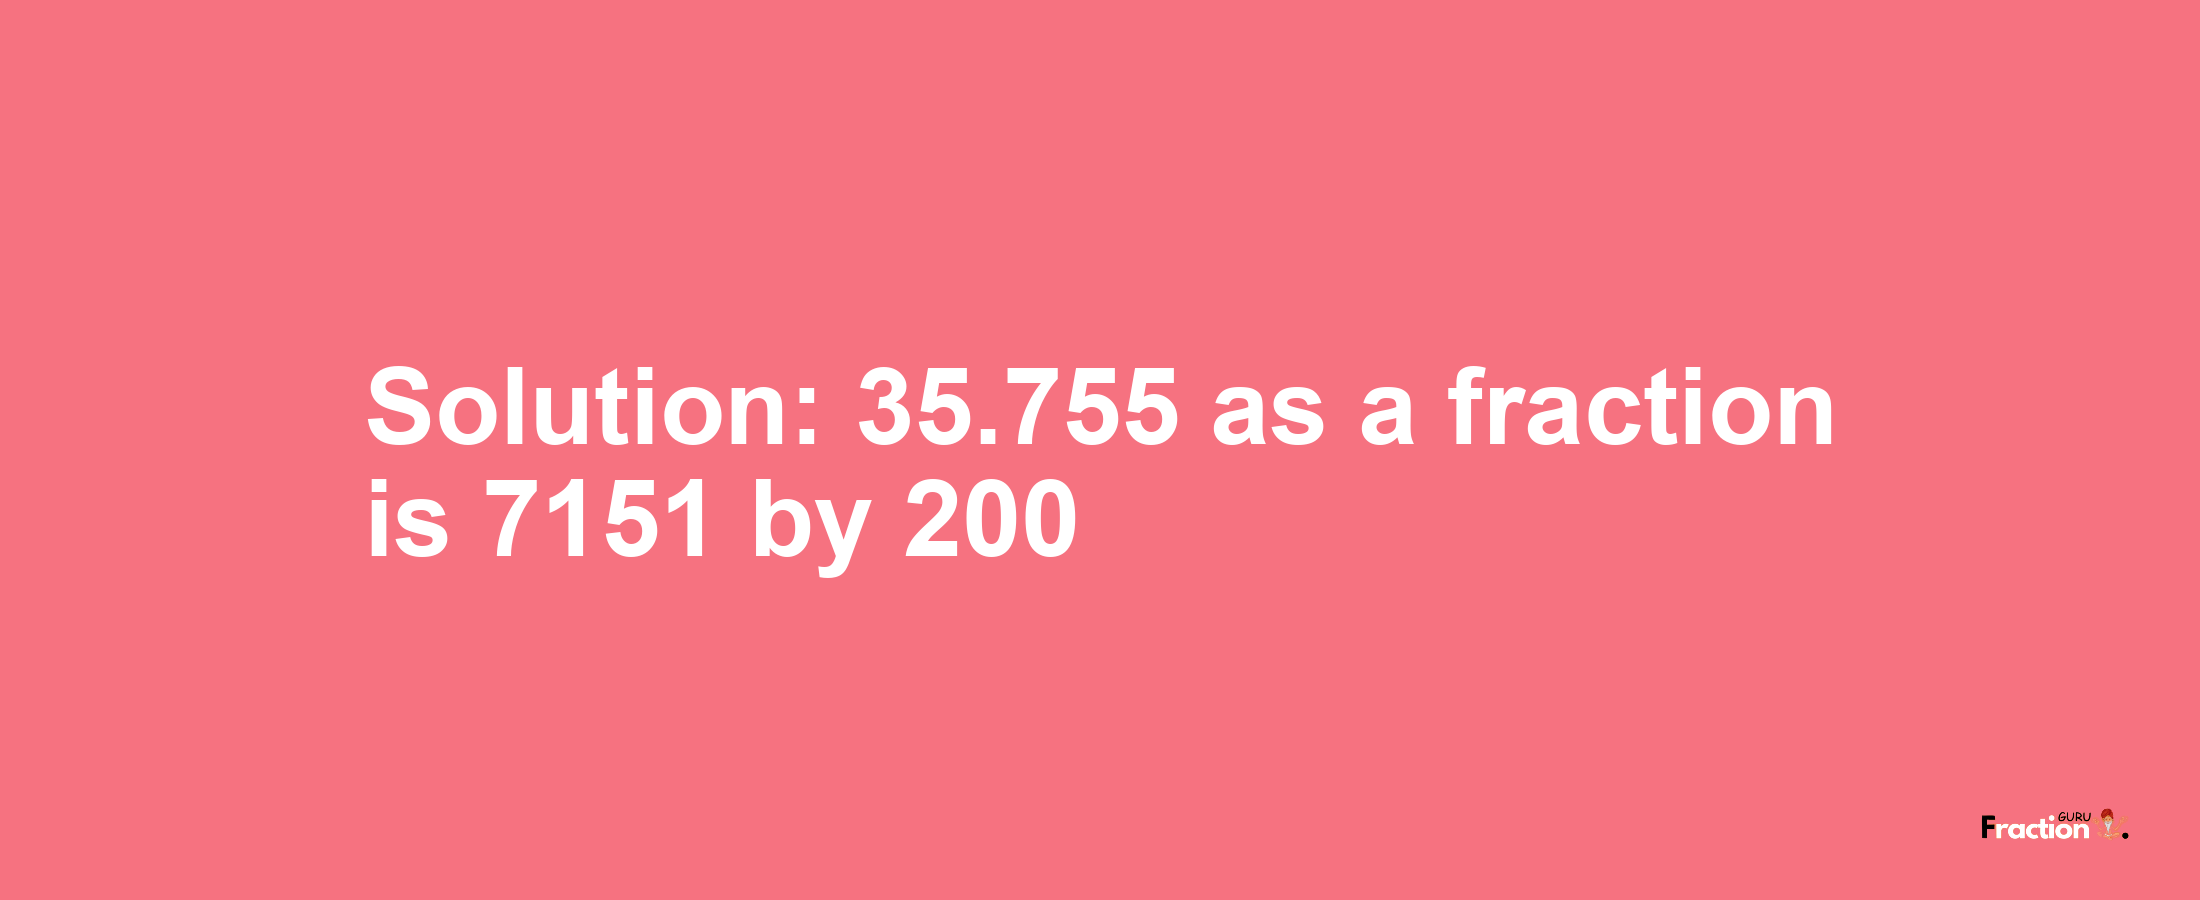 Solution:35.755 as a fraction is 7151/200